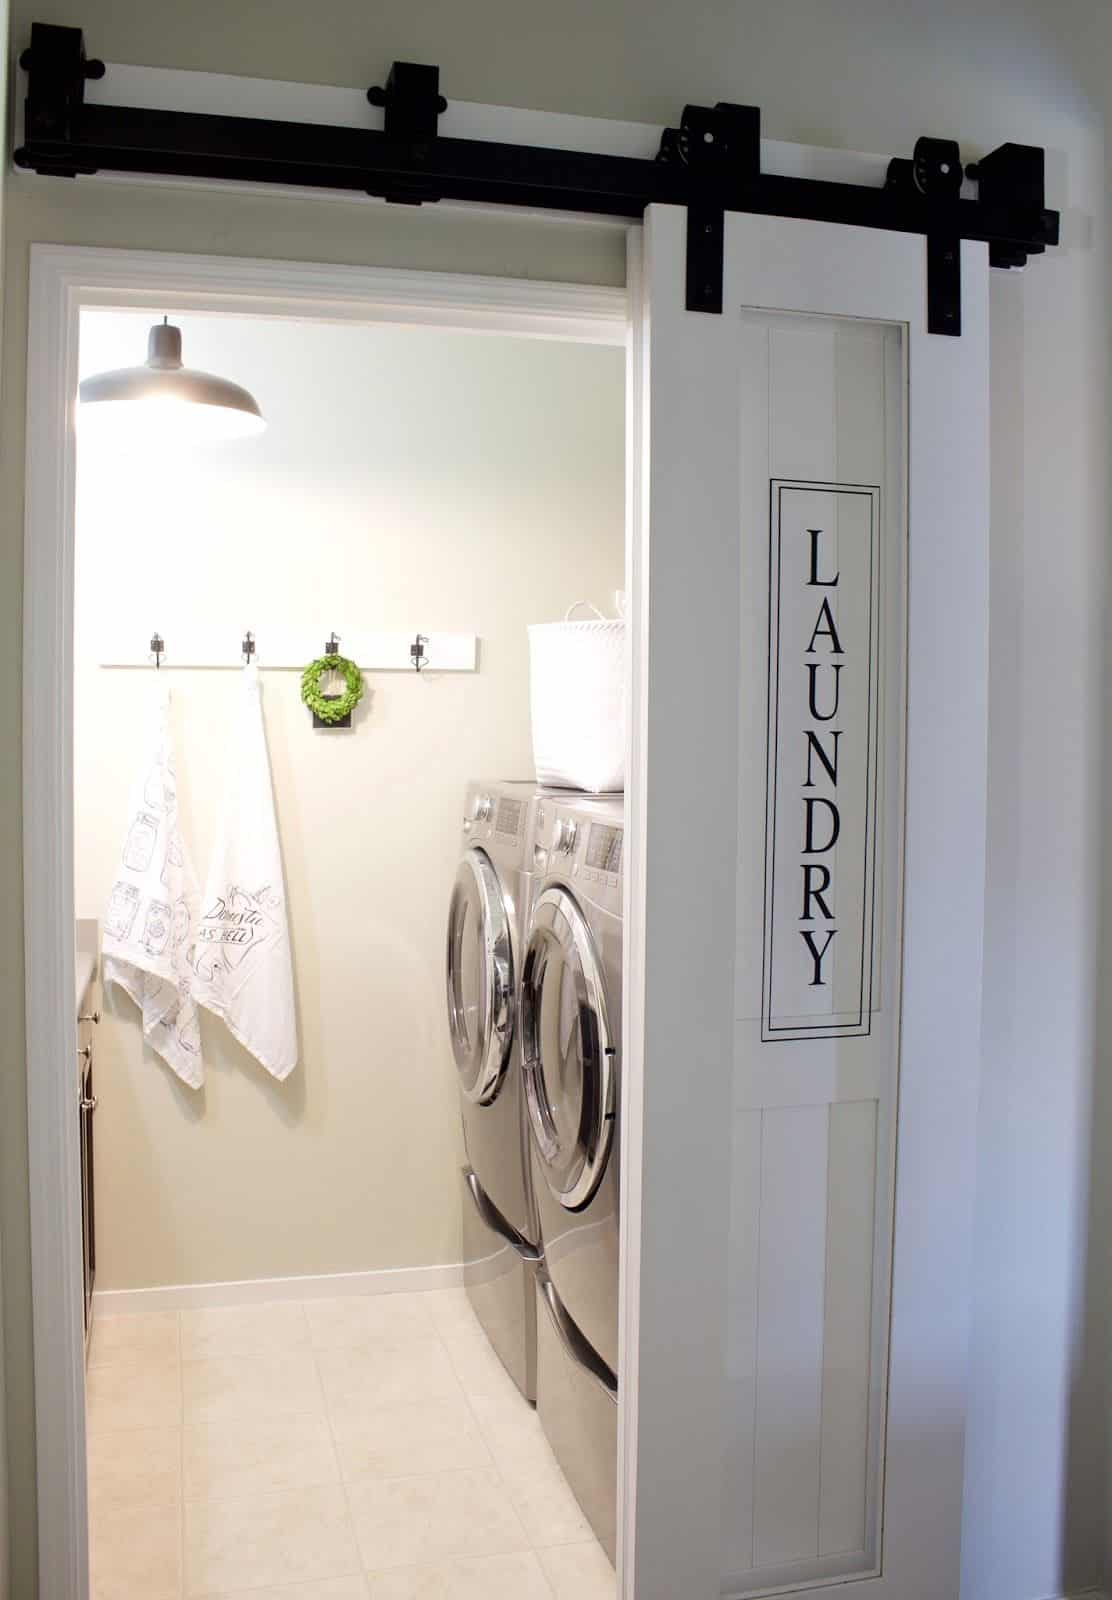 Give your laundry room a customized touch by adding the words "laundry" on your skinny barn doors.